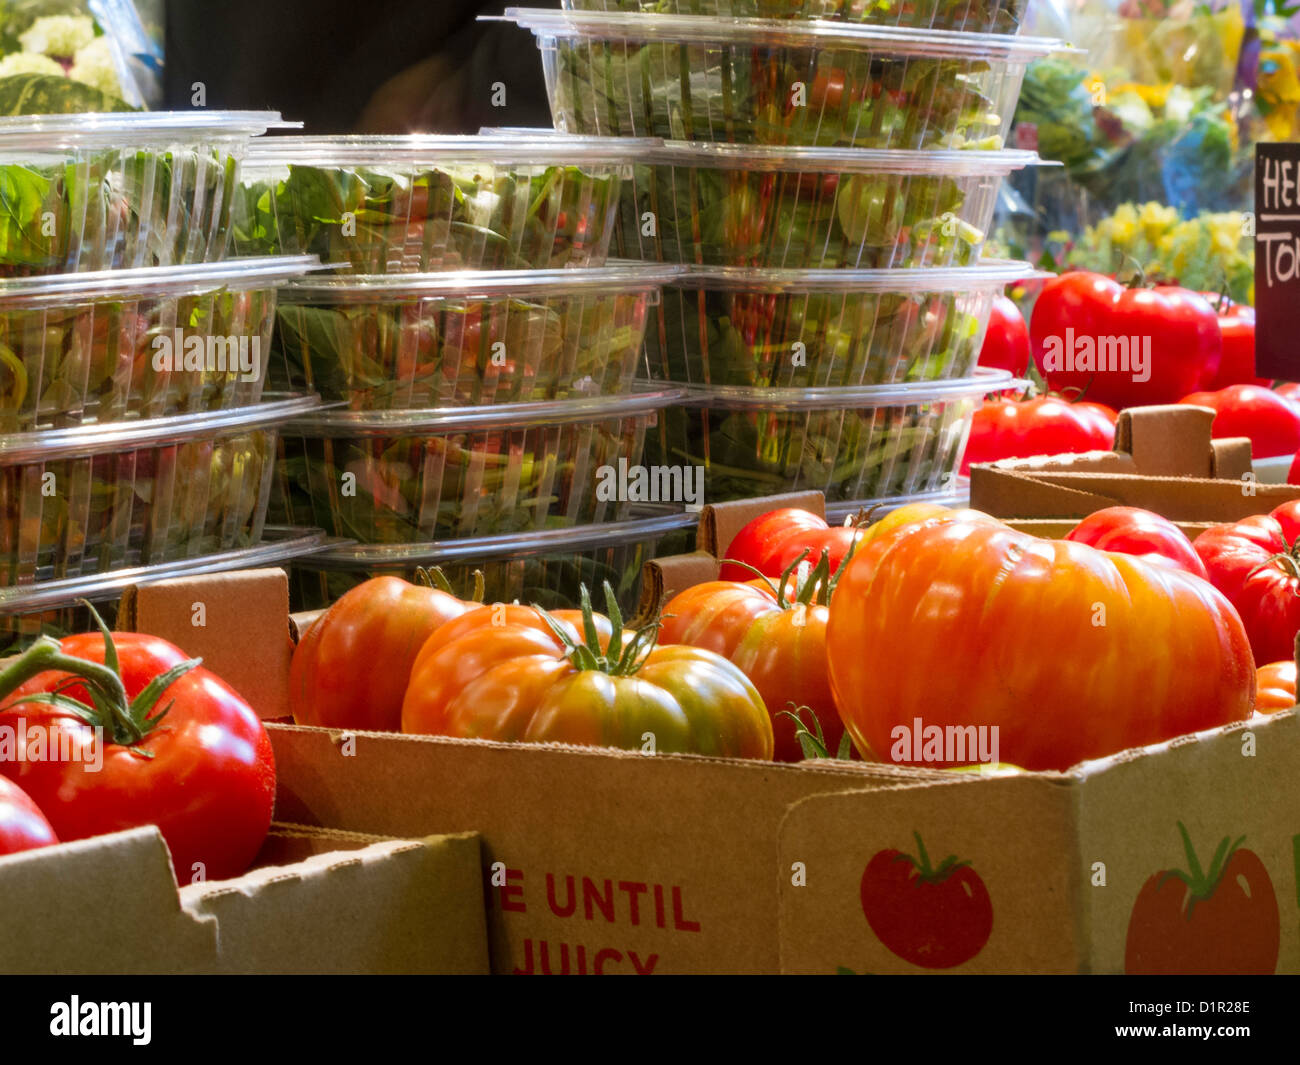 Salad Containers and Tomatoes,  Eli Zabar's, Grand Central Market, NYC Stock Photo